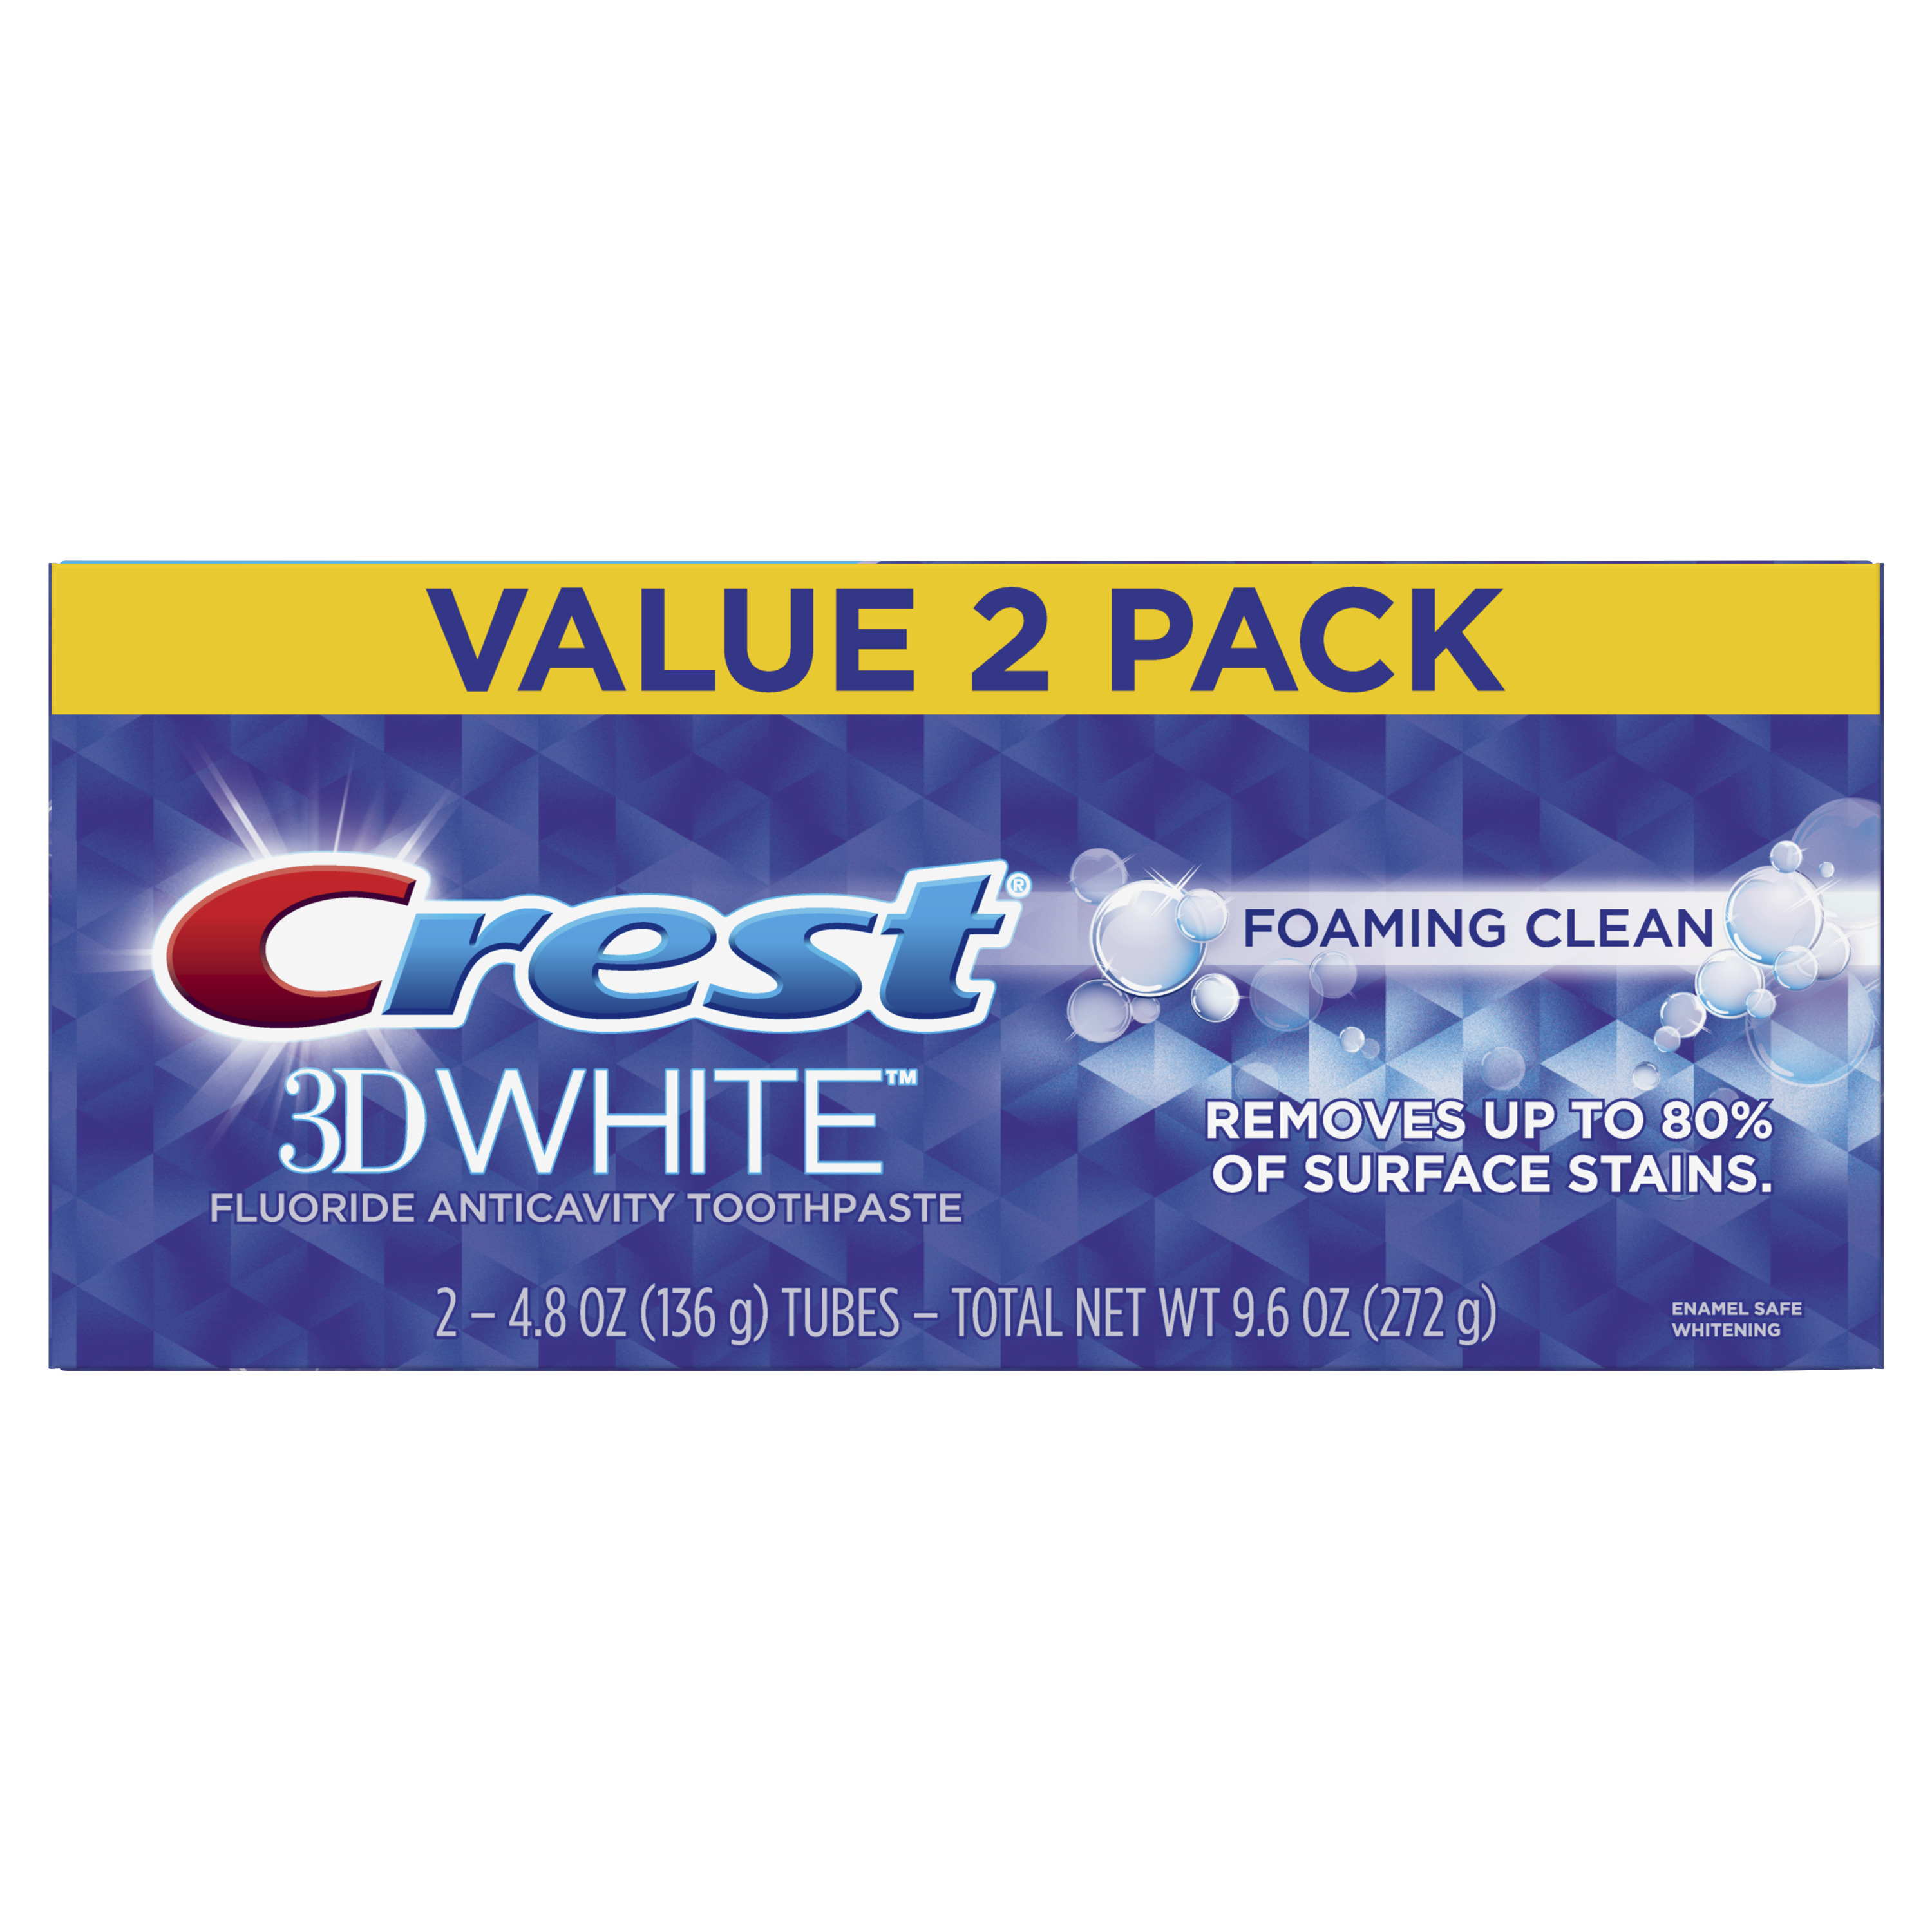 Crest 3D White Foaming Clean Whitening Toothpaste, 4.8 oz, Pack of 2 - image 1 of 9